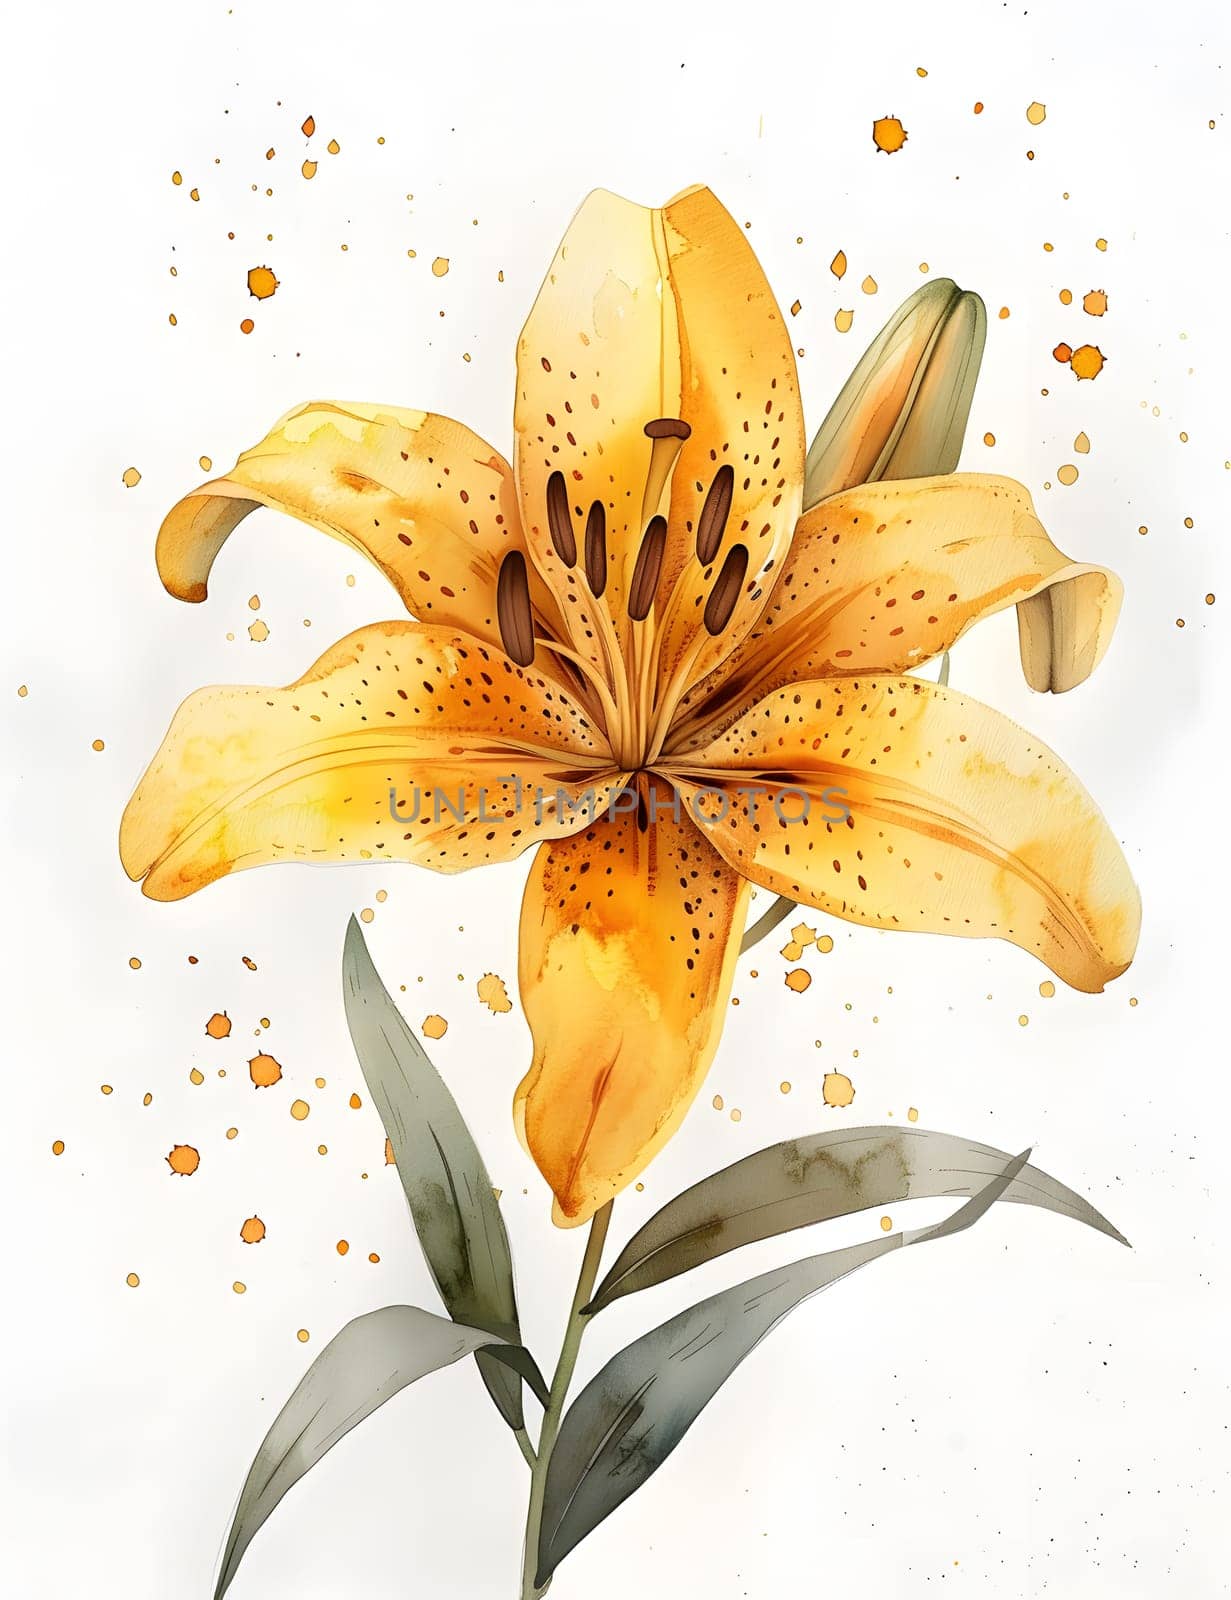 Artistic watercolor of yellow lily on white background by Nadtochiy